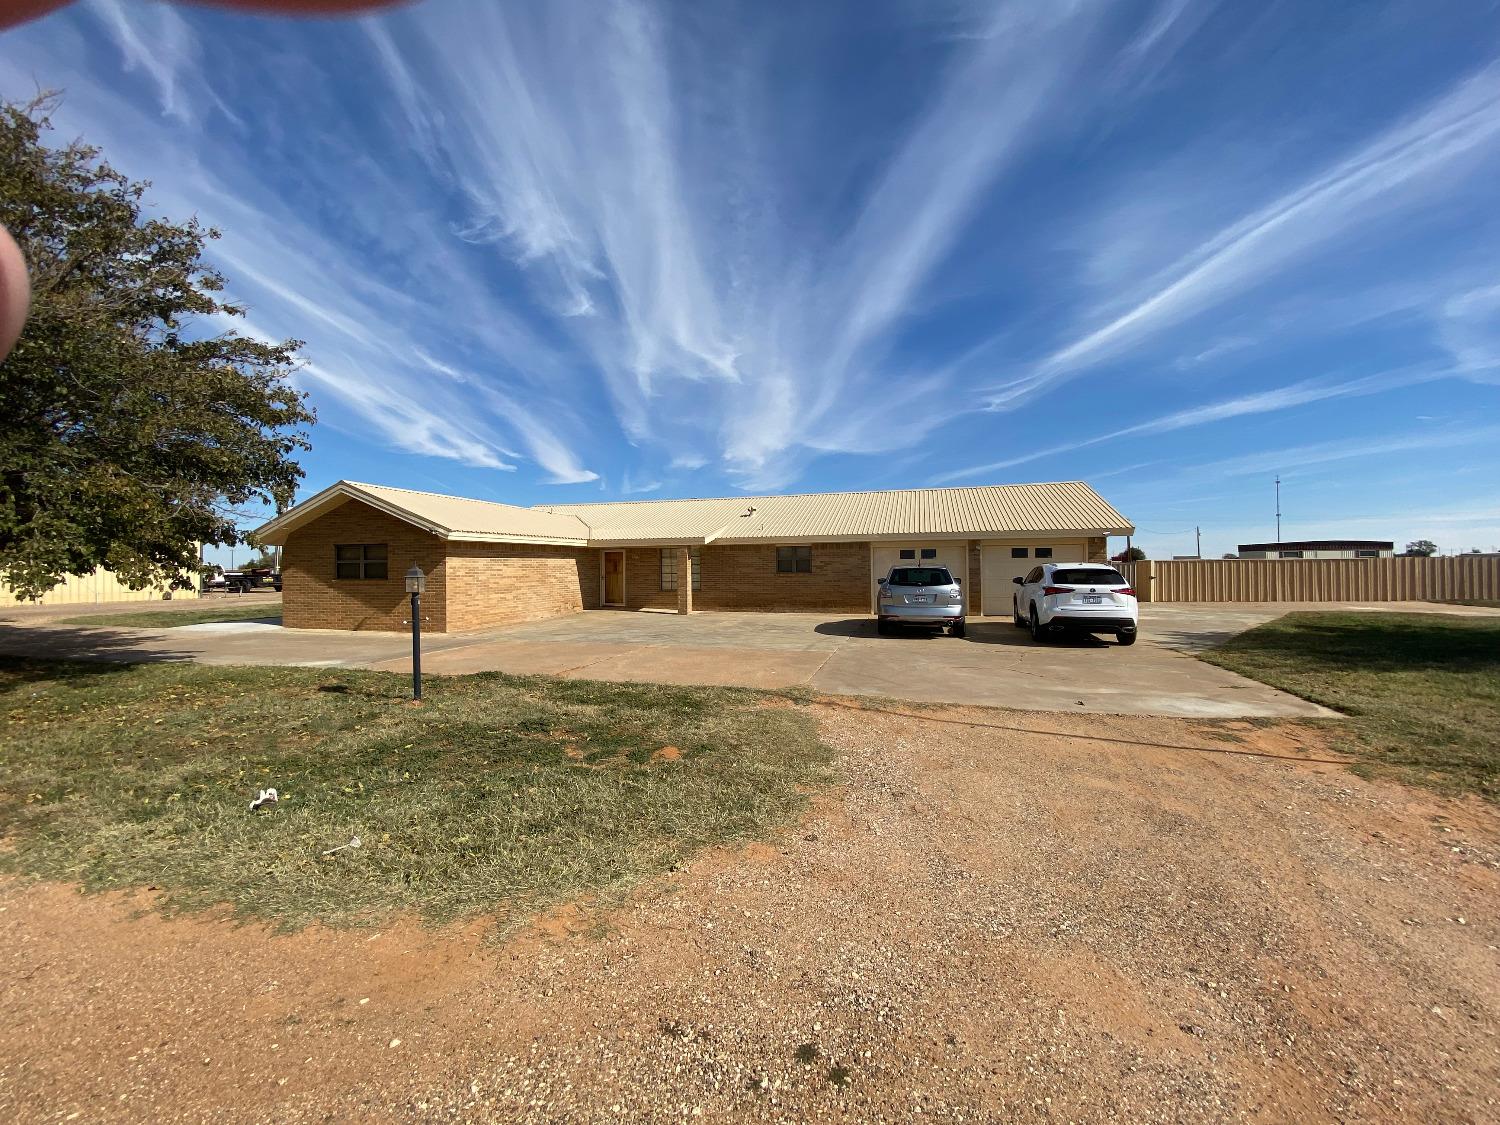 Ranch style 3/3/2 home with basement on 5.05 acres including 9,000 sq. ft of workshop area.Master BR closet is 20.5 X 8! Kitchen has double ovens, stainless appliances & tons of storage.2 living areas.  1st with gas fireplace & built-in gun cabinet and 2nd is 20 X 21 with plantation shutters and a massive brick hearth.Great storage throughout home. 2 water heaters & 2 HVAC systems. Metal roof with recent gutters.  Out buildings include a 7,200' shop with offices & 2 bathrooms, an 1,800' shop, animal shed/pens and well house.  The property is totally fenced.